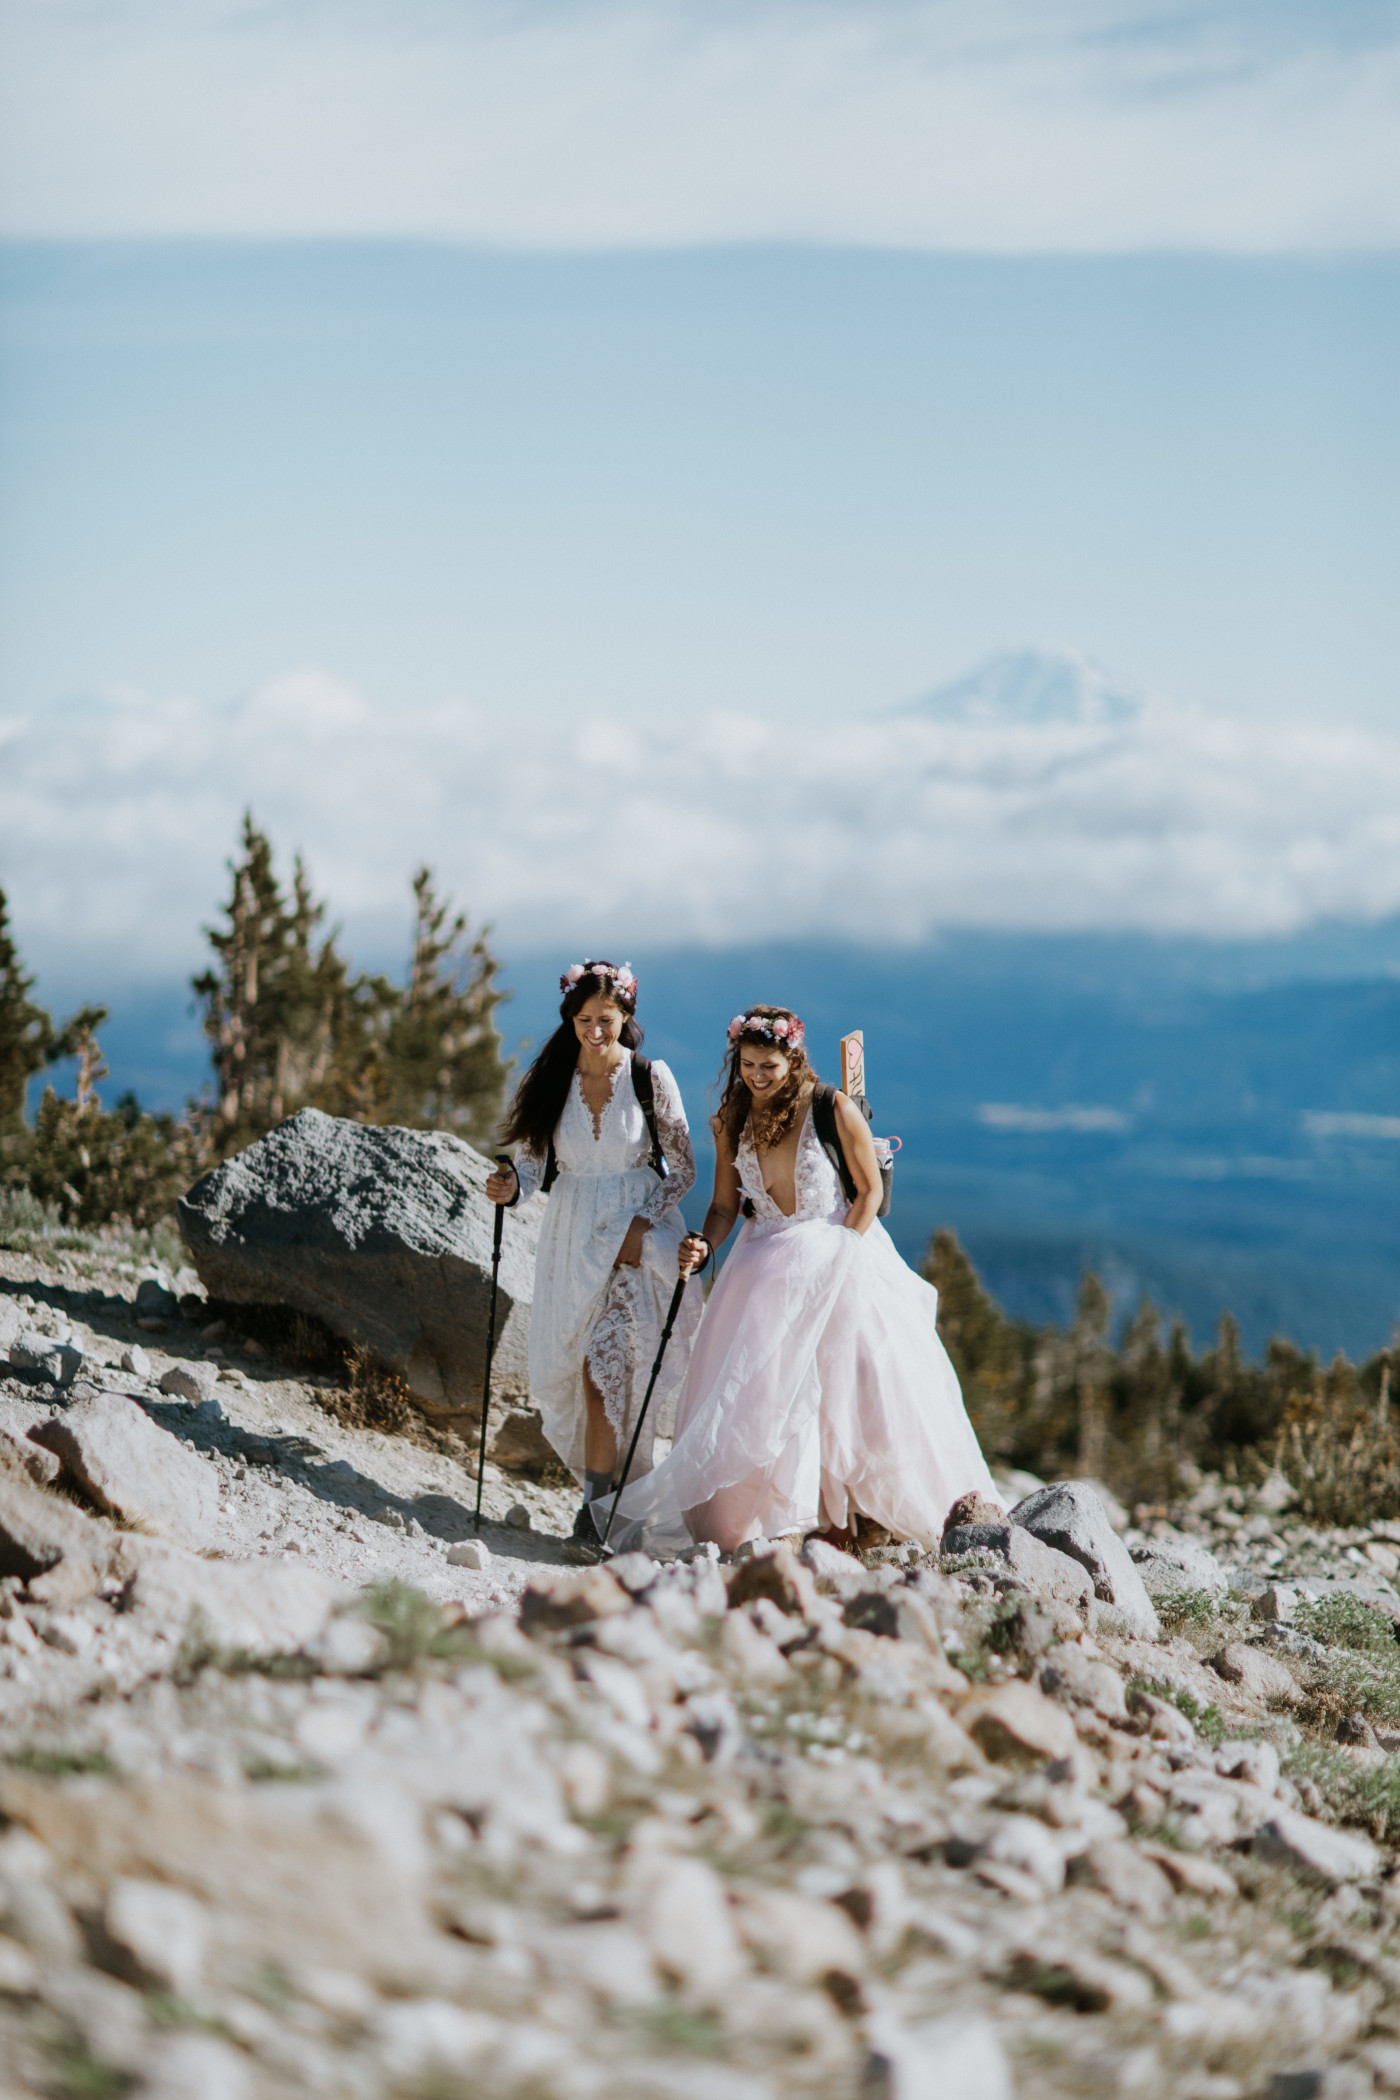 Heather and Margaux trekking along the trail. Elopement photography at Mount Hood by Sienna Plus Josh.